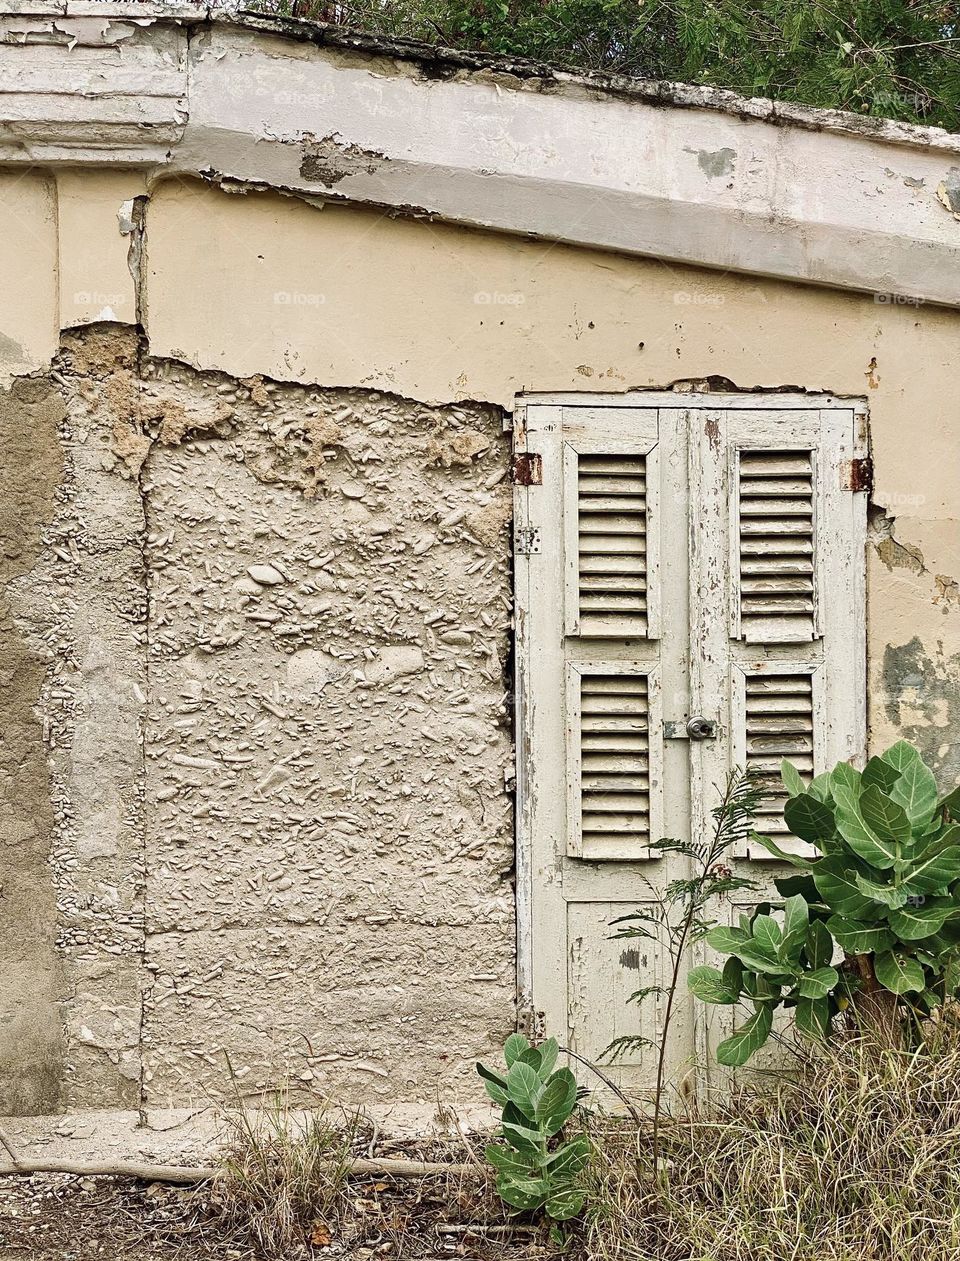 A door in a house with chipping paint that shows the concrete made from coral underneath